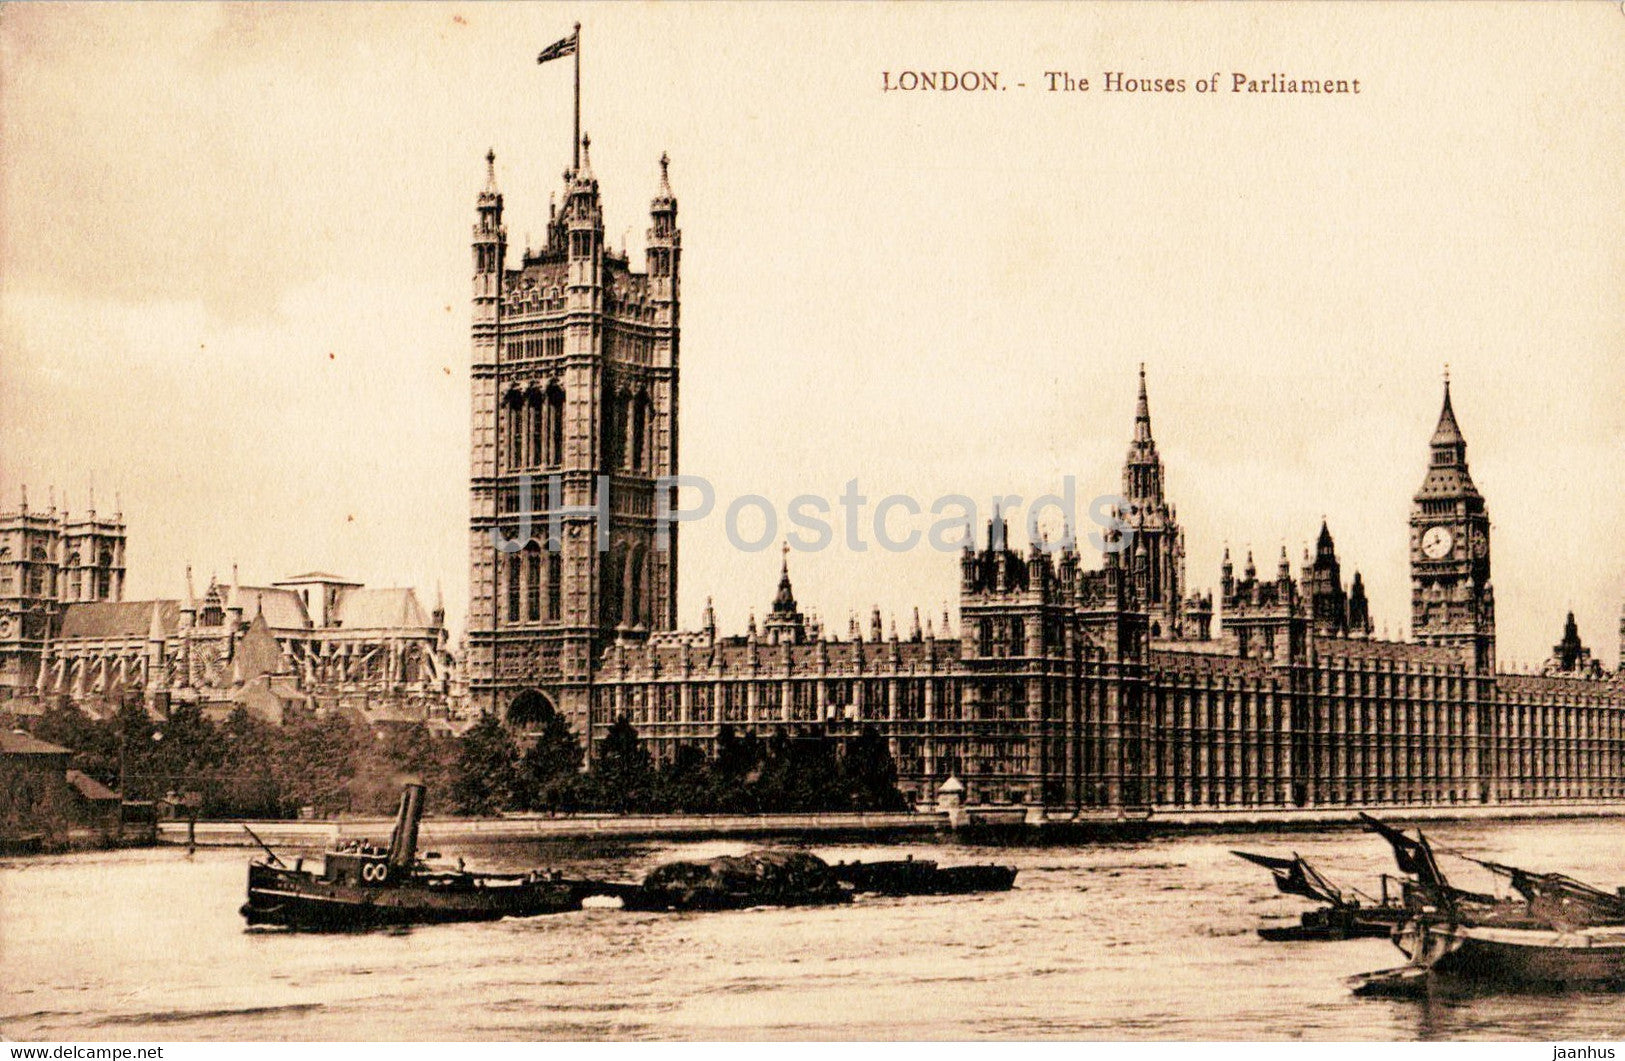 London - The Houses of Parliament - boat - old postcard - England - United Kingdom - unused - JH Postcards